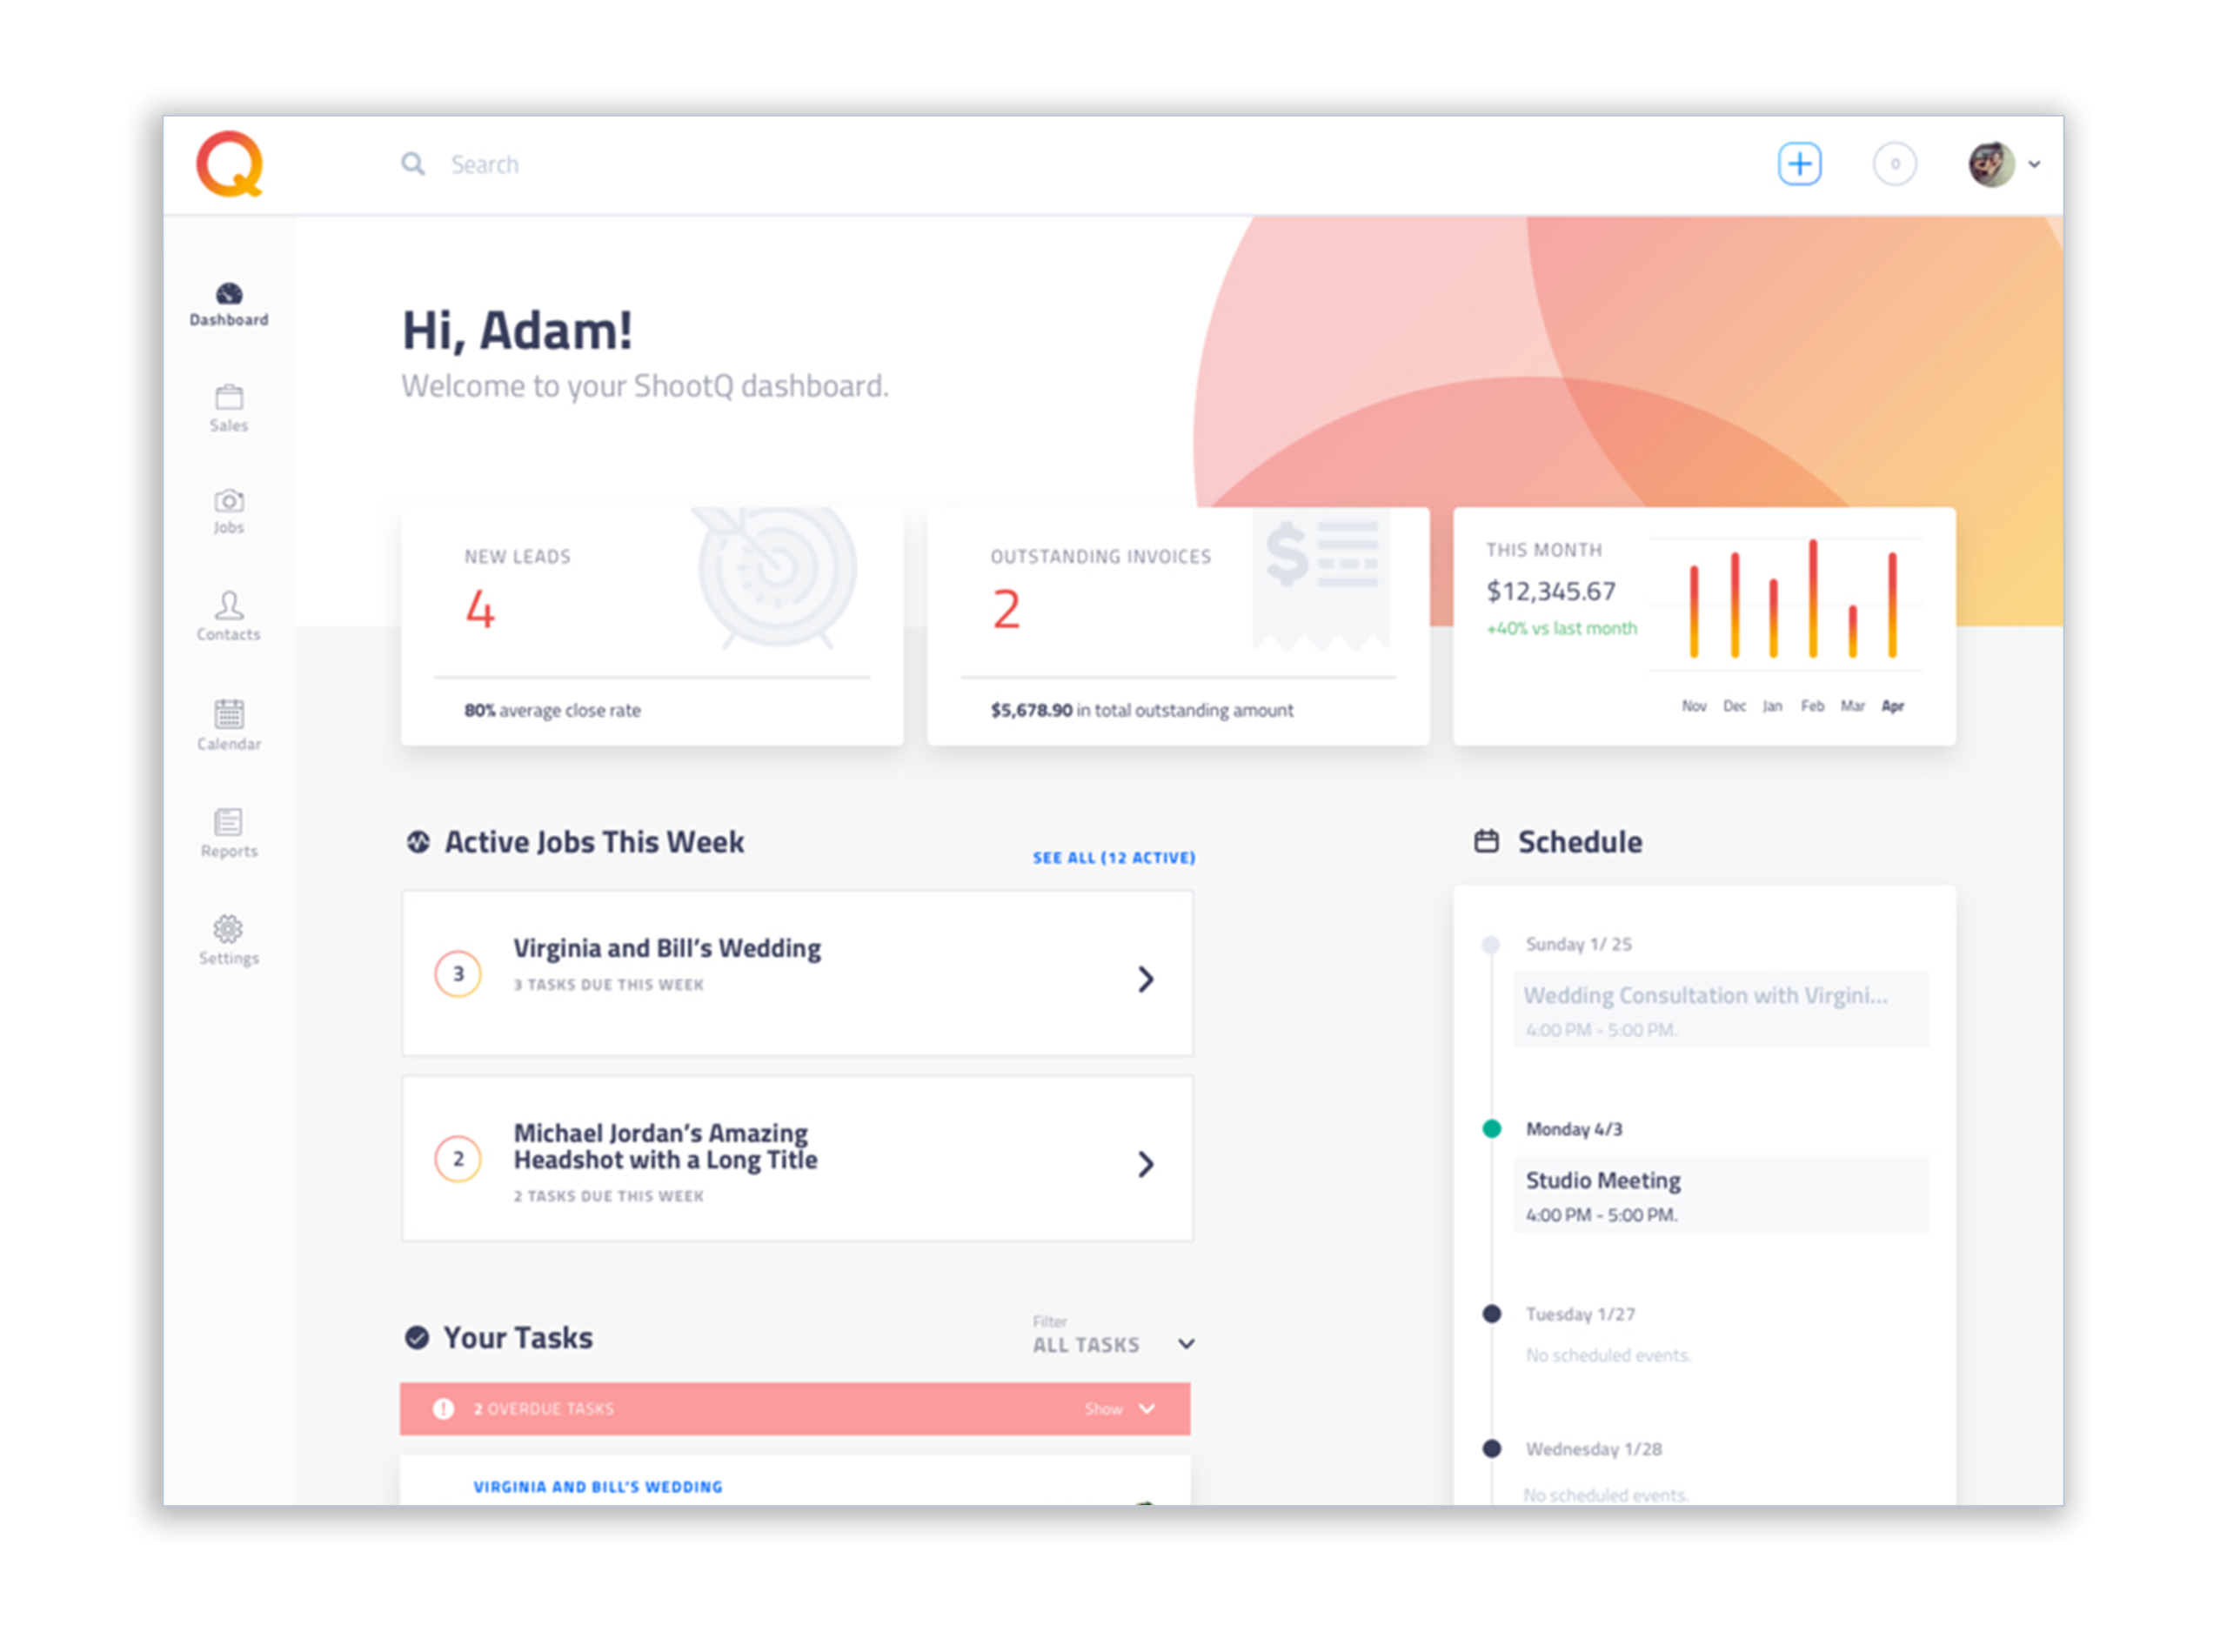 All-in-one business management dashboard